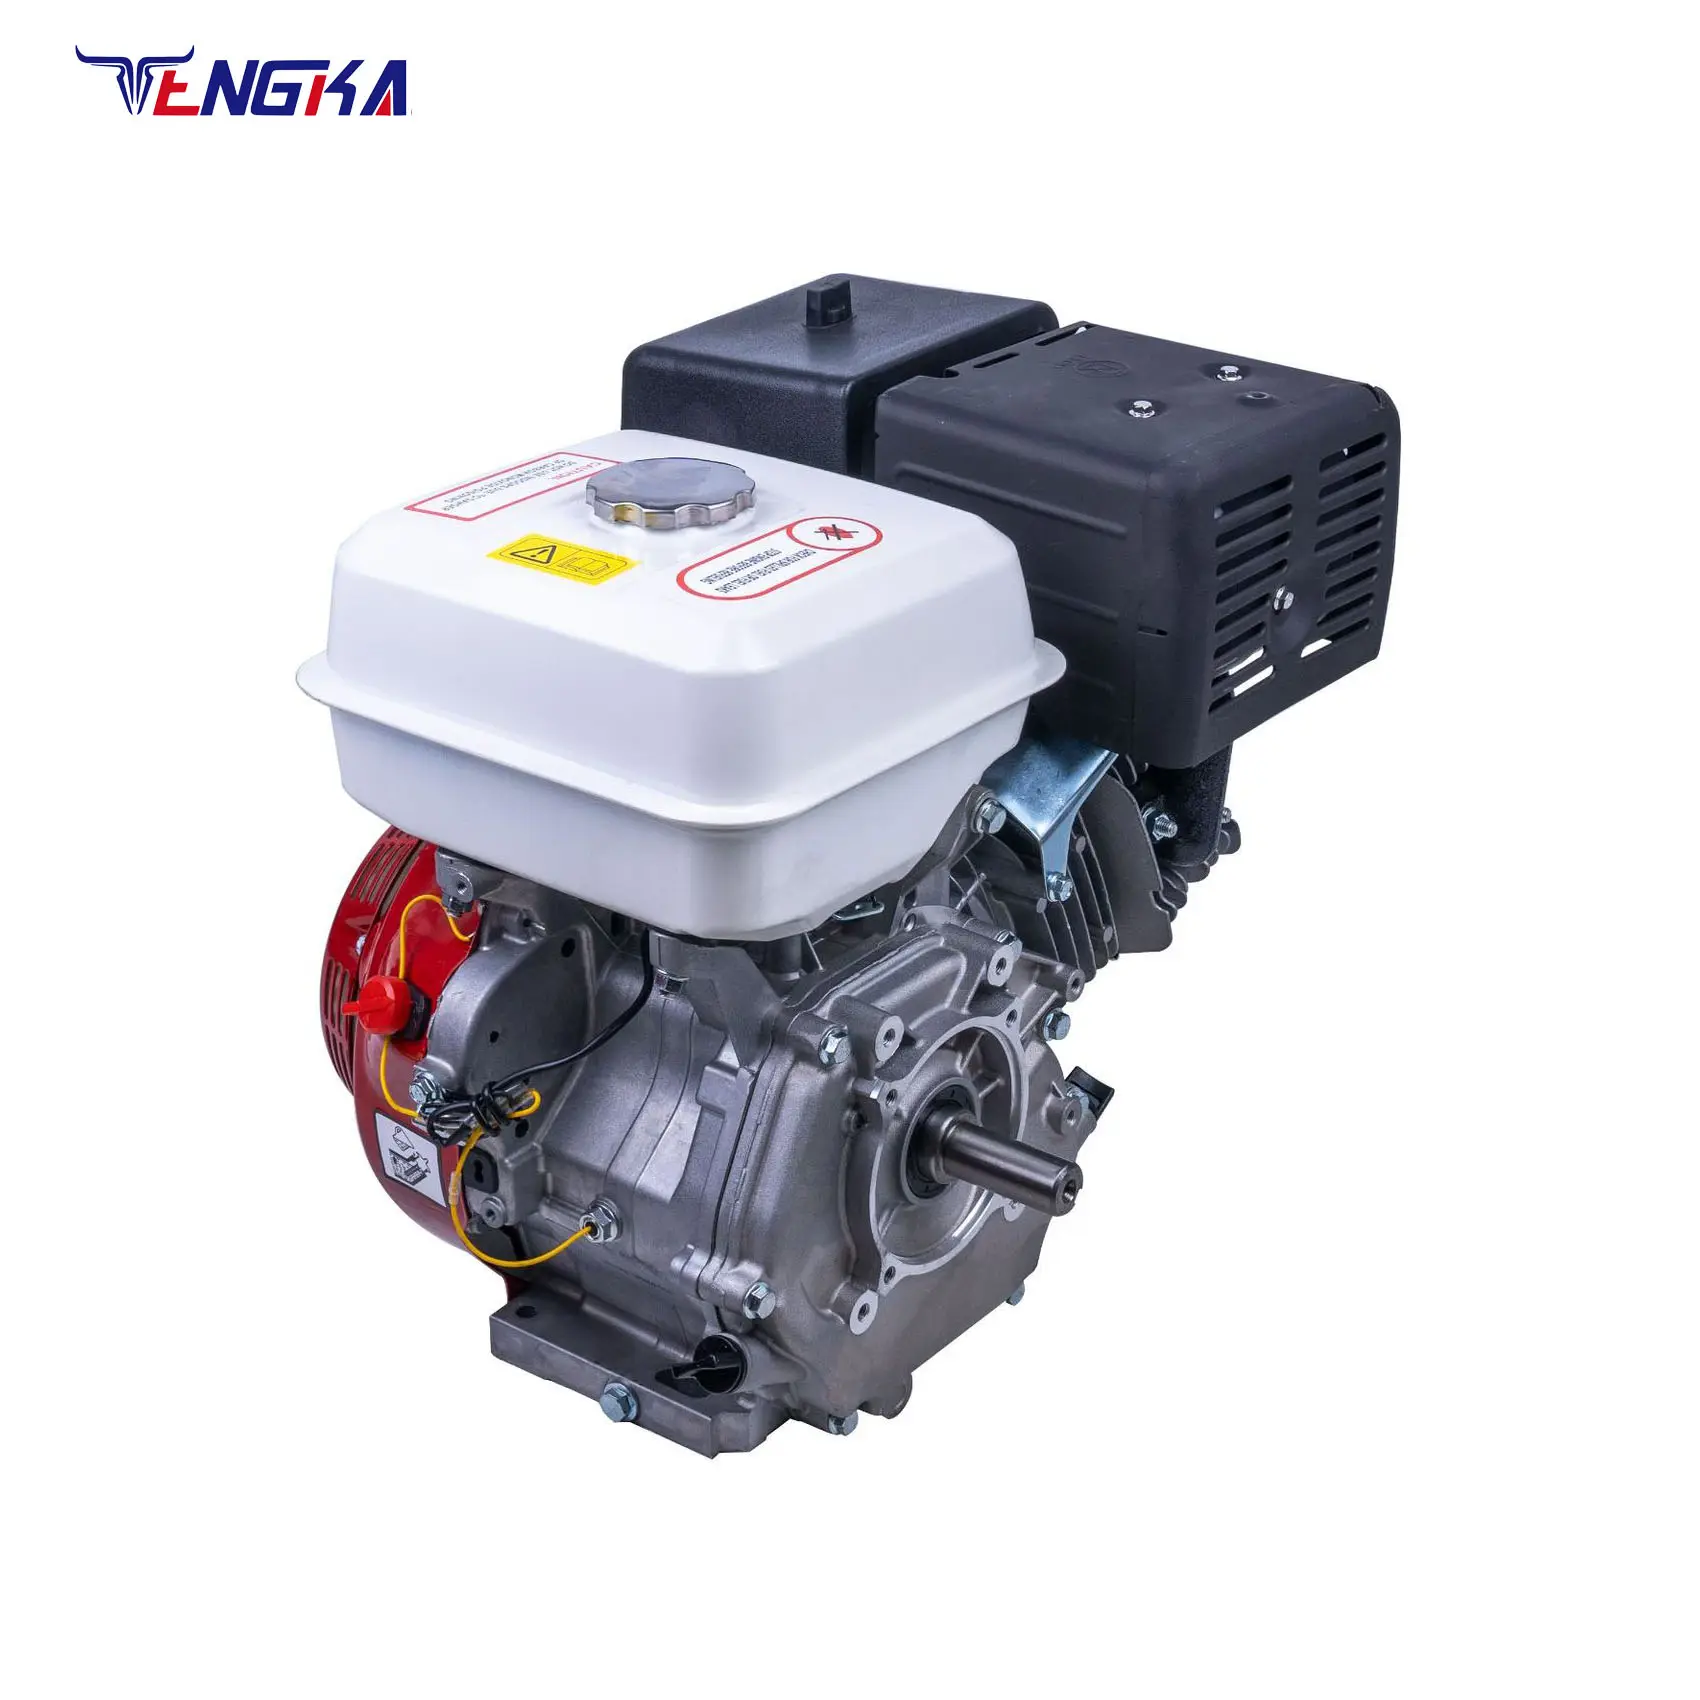 Hot Sale 170f 210cc Gasoline Engine with Recoil Starting System